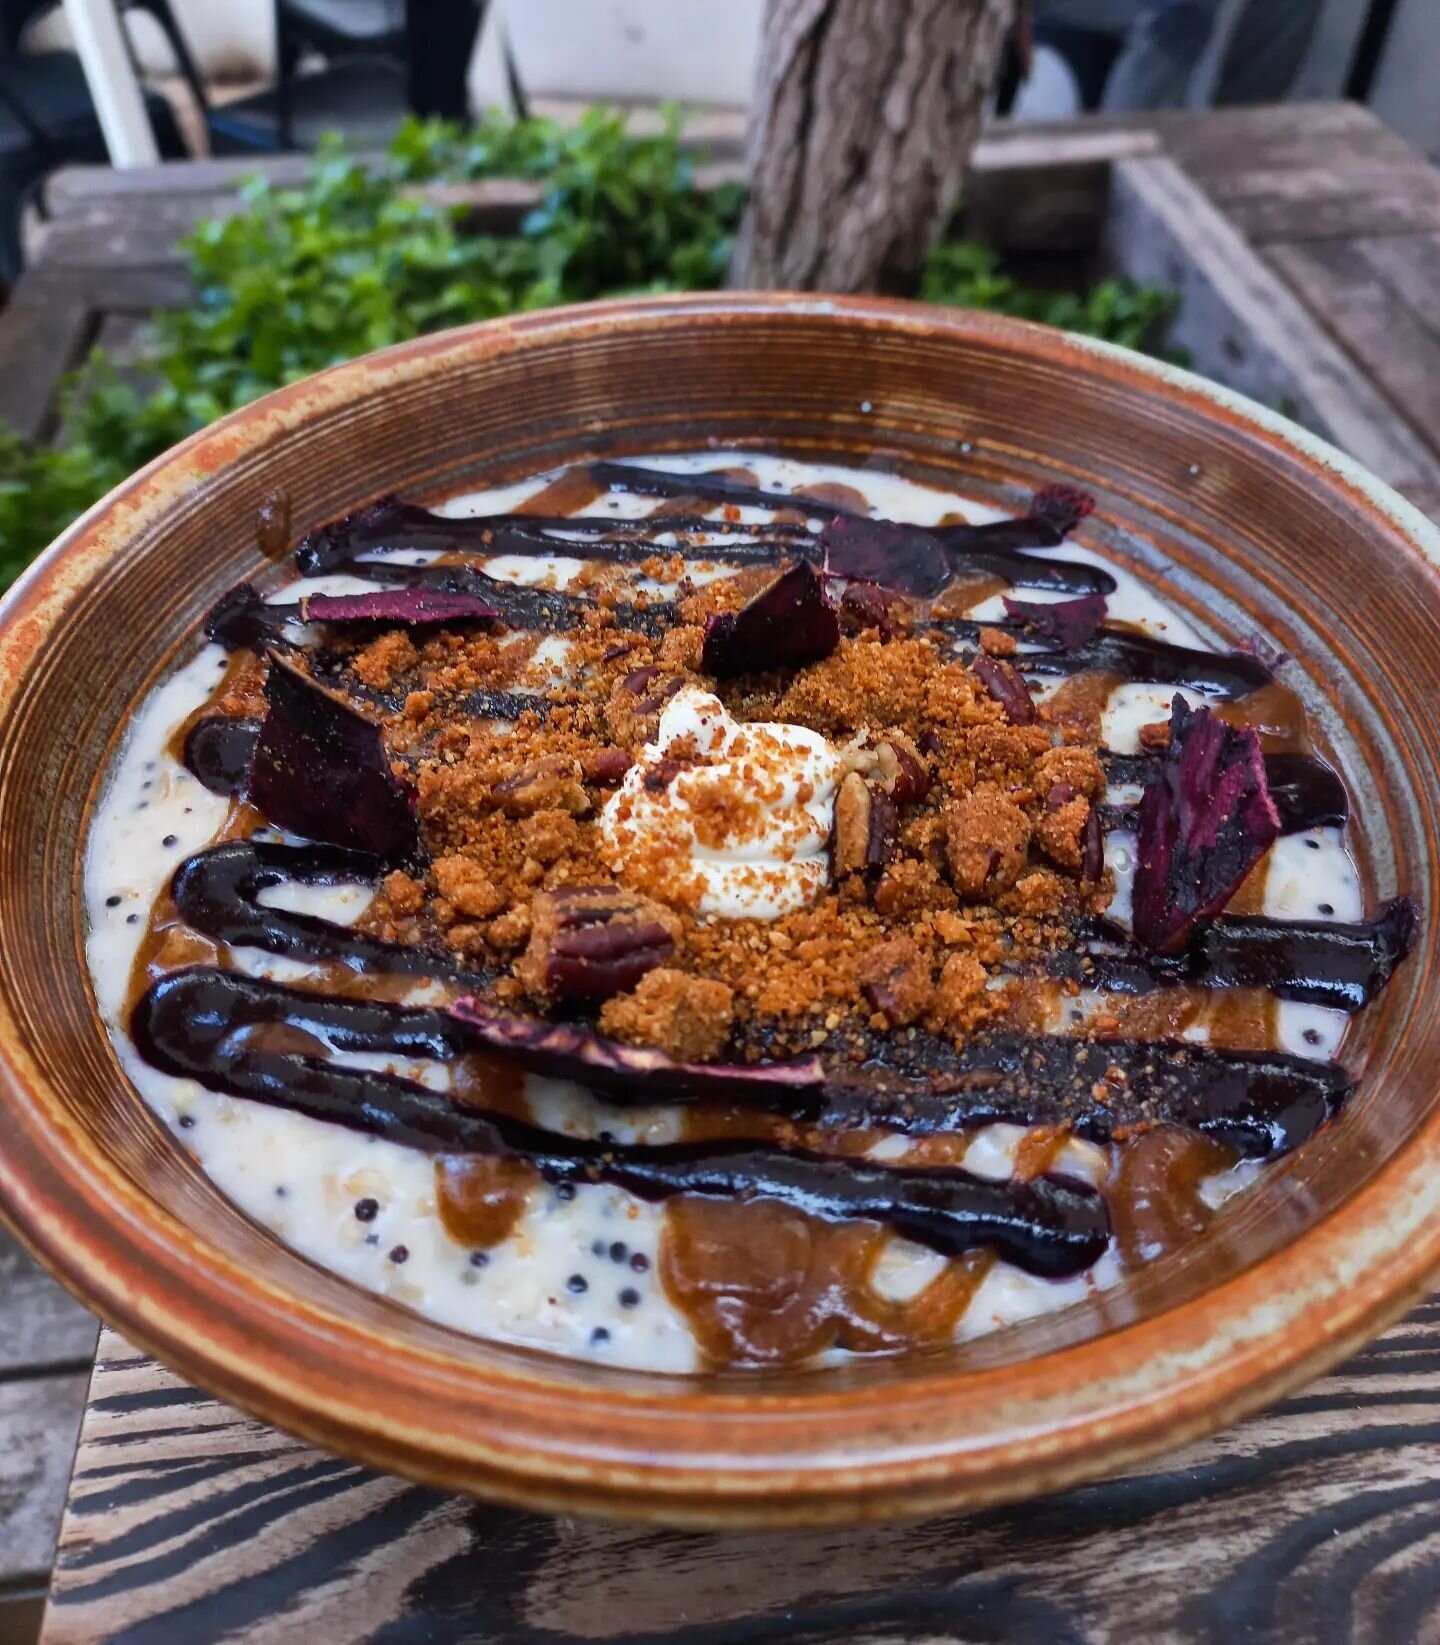 🤤🤤 The wait is over. Porridge is back on the menu starting from this weekend! 
.
This year, we have made a banana and multigrain porridge with mulled orange labne, blueberry compote, a date syrup, pecan streusel, and garnished with some blackberry 